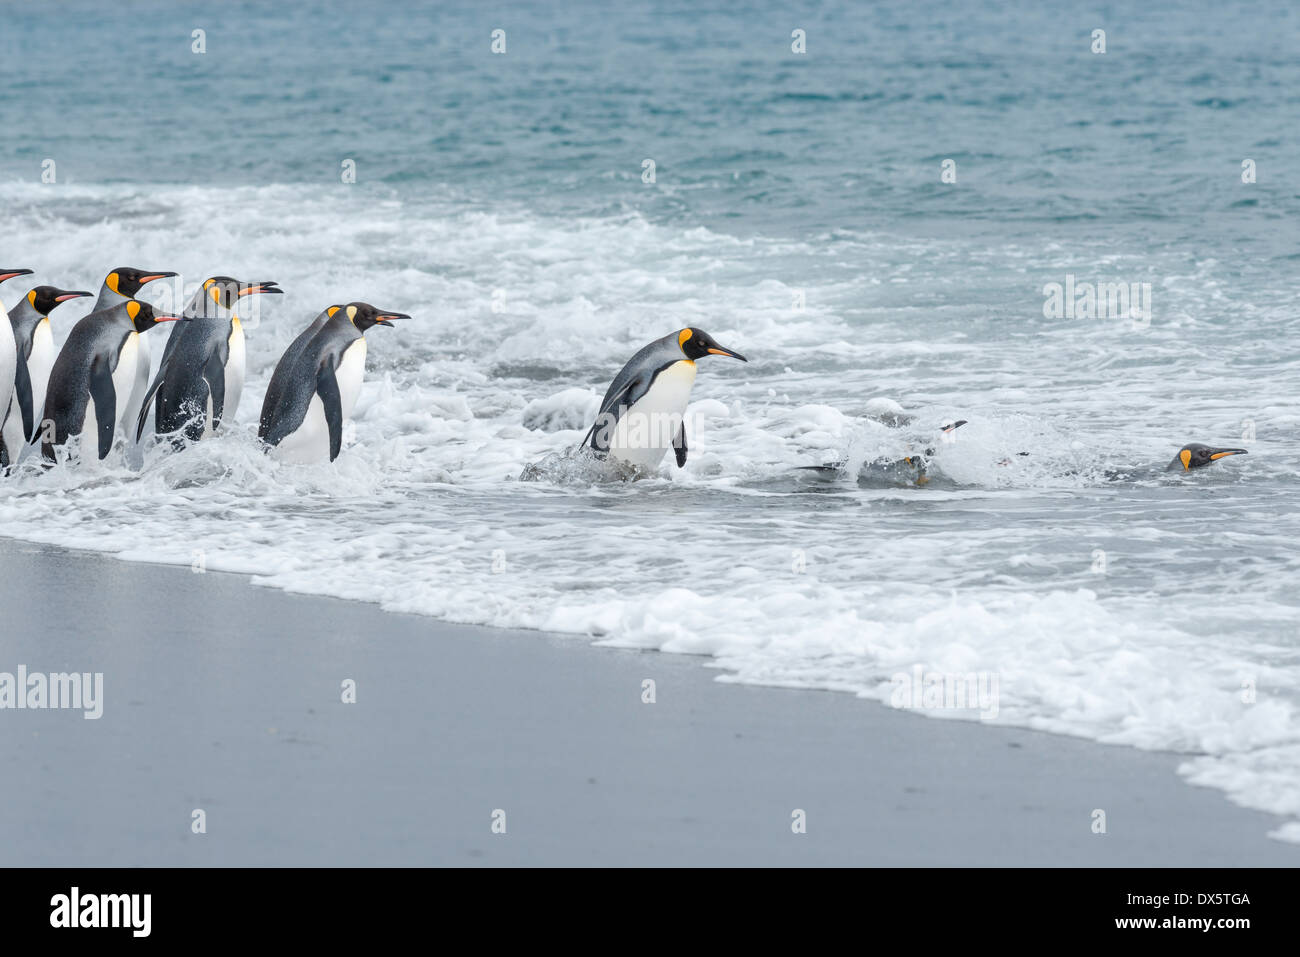 Group of King Penguins diving into ocean from beach Stock Photo